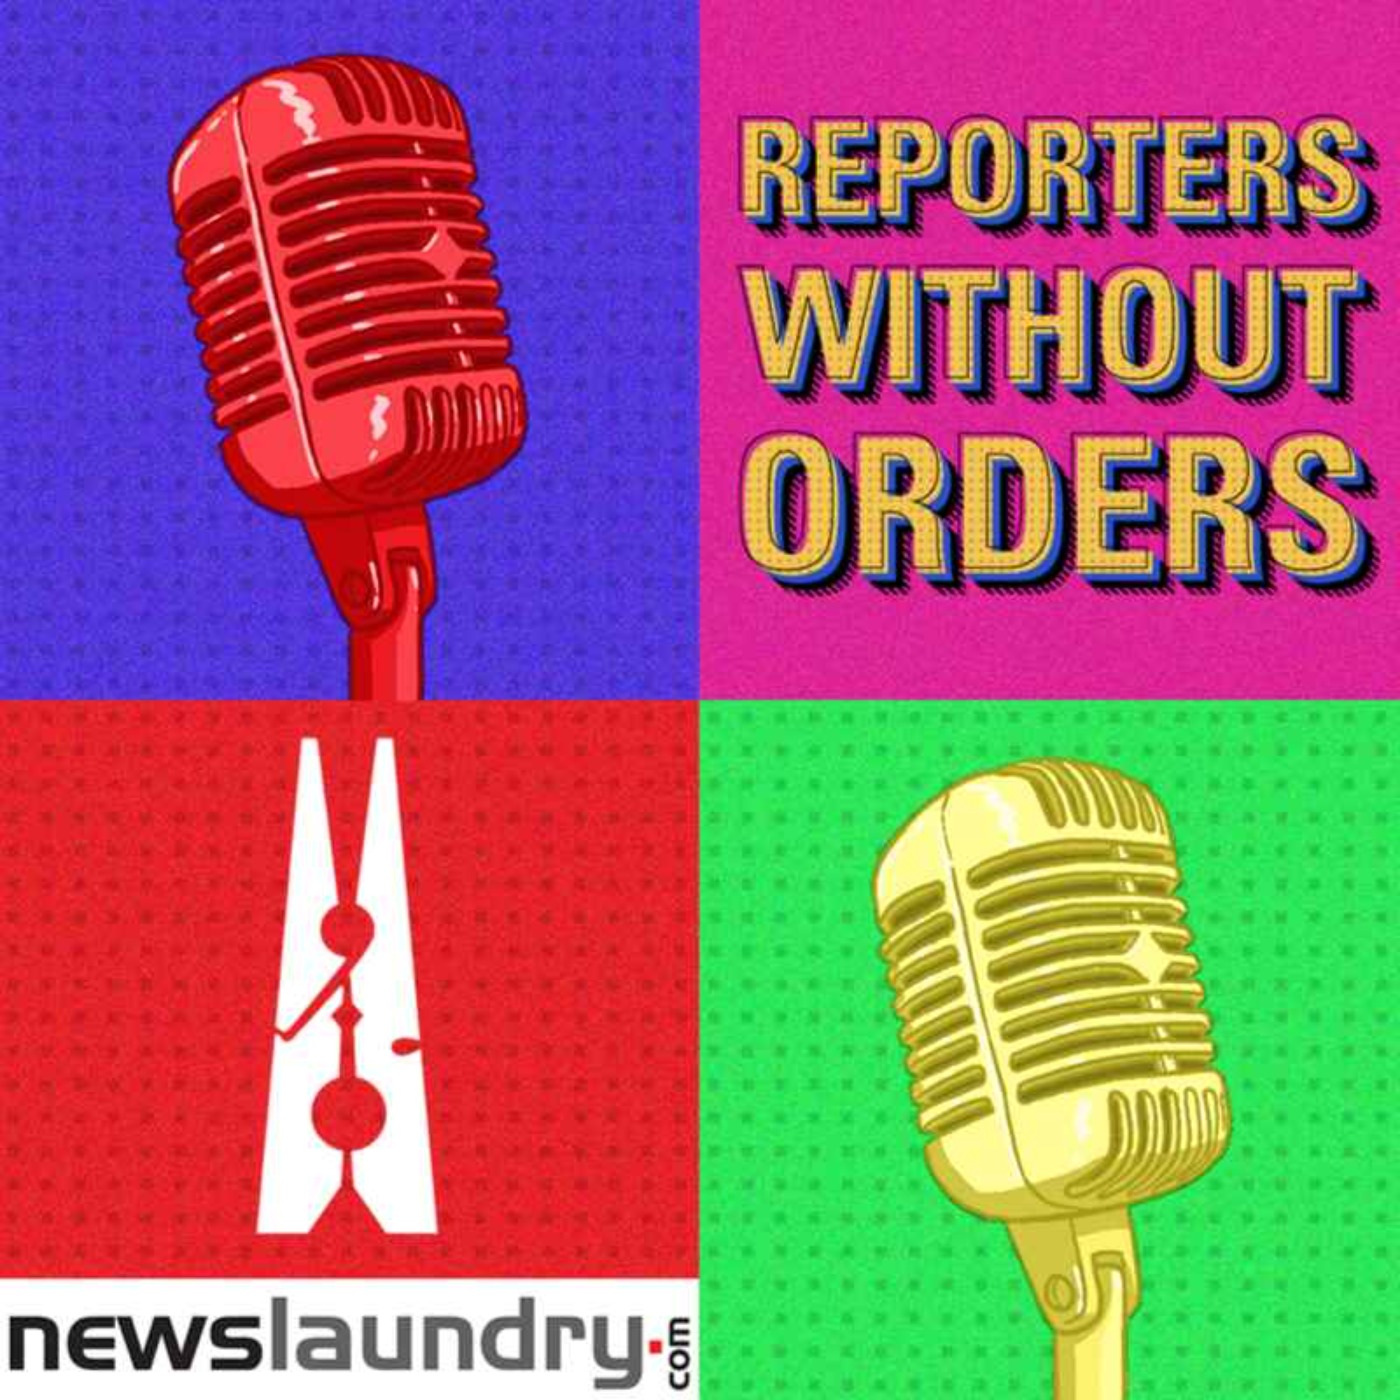 Reporters Without Orders Ep 179: Dalit child’s ‘rape’ and demonisation of Muslim converts